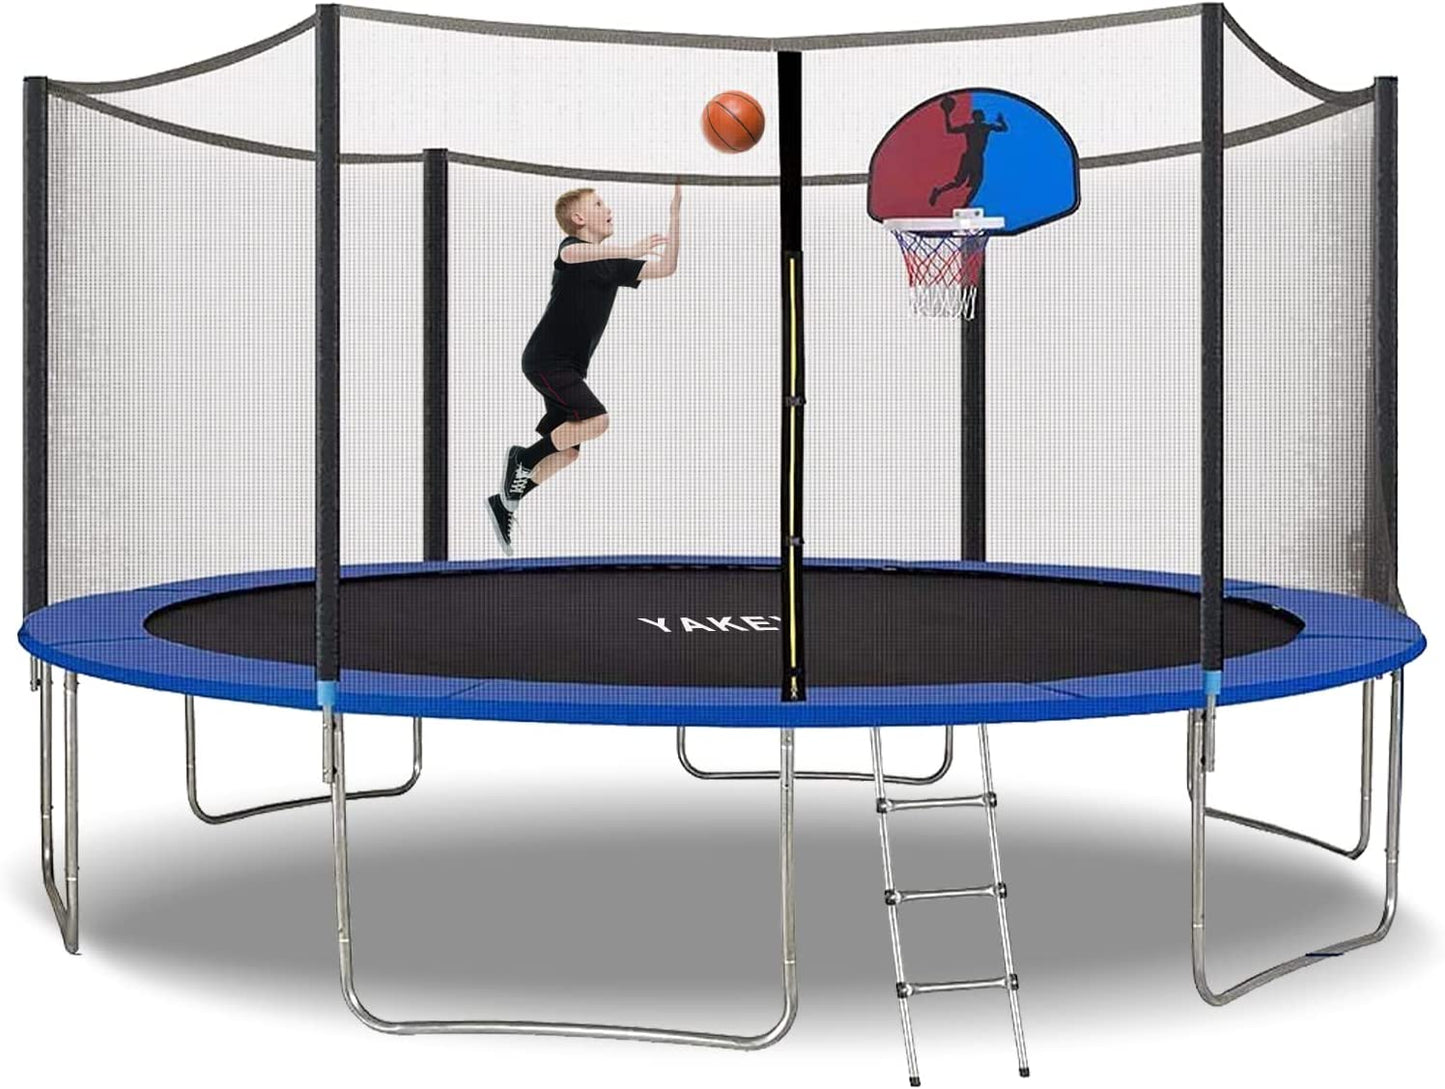 YAKEY 15FT Trampoline with Safety Enclosure Net